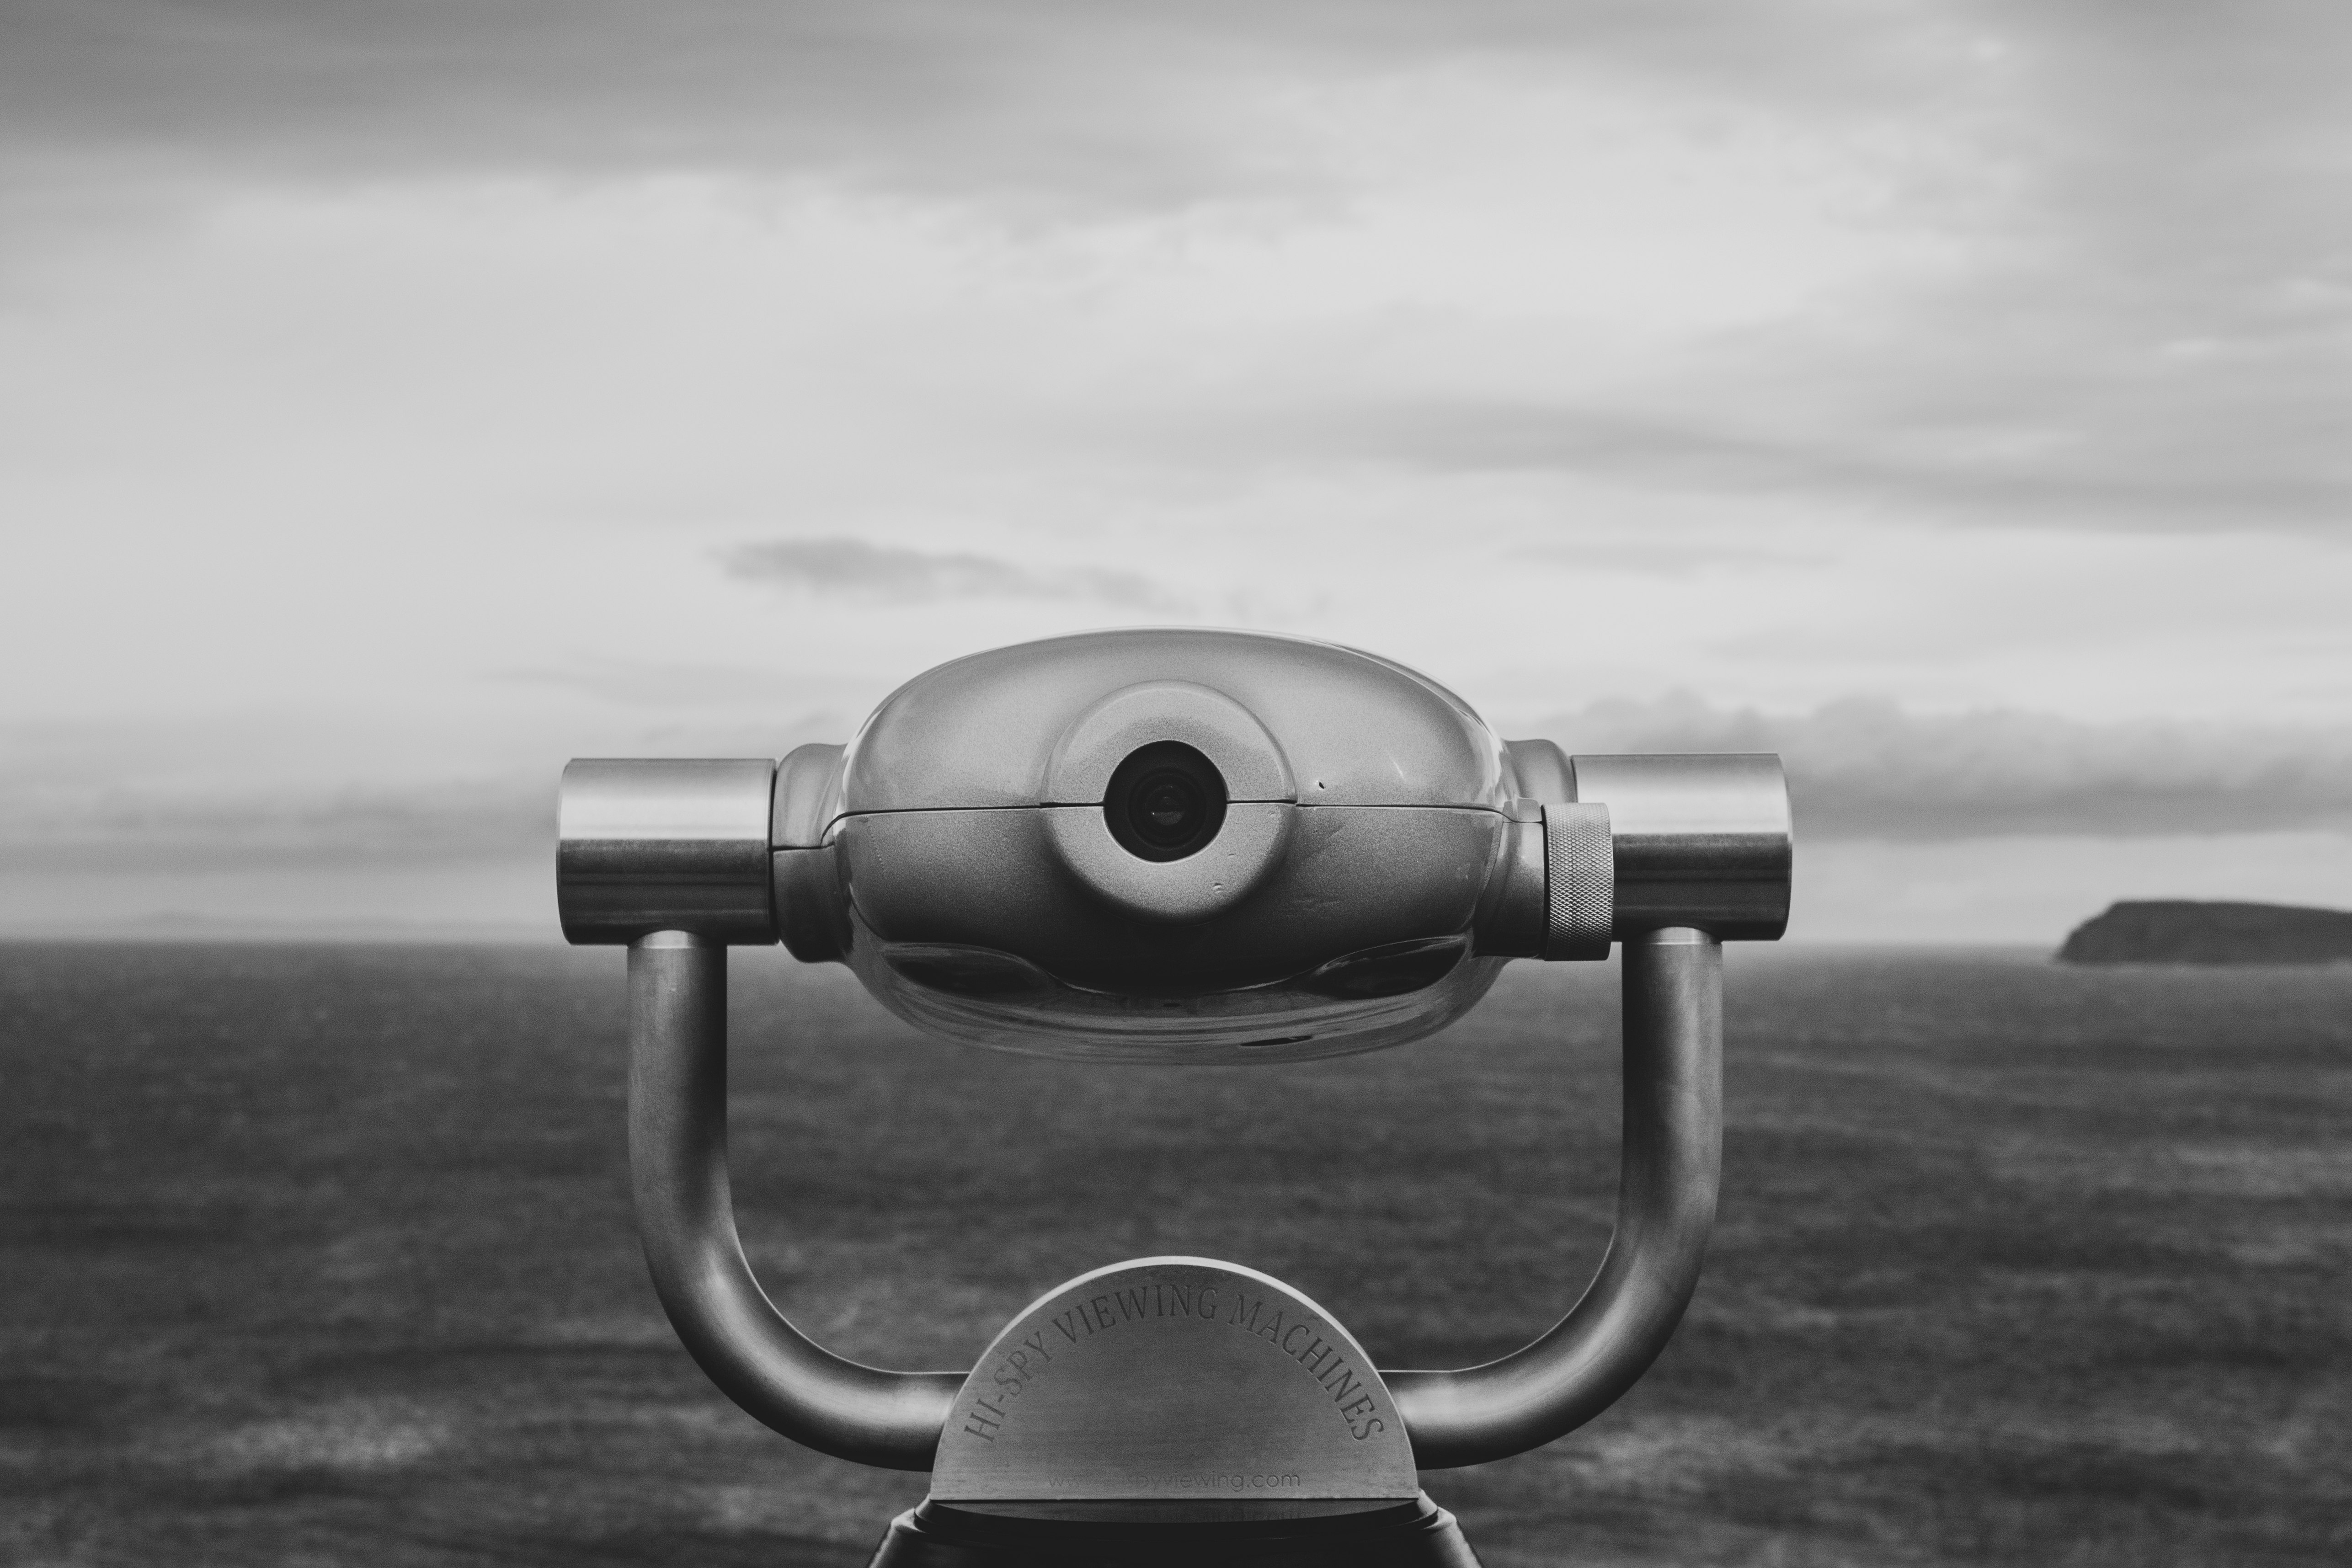 gray coin operated binoculars under cloudy sky during daytime